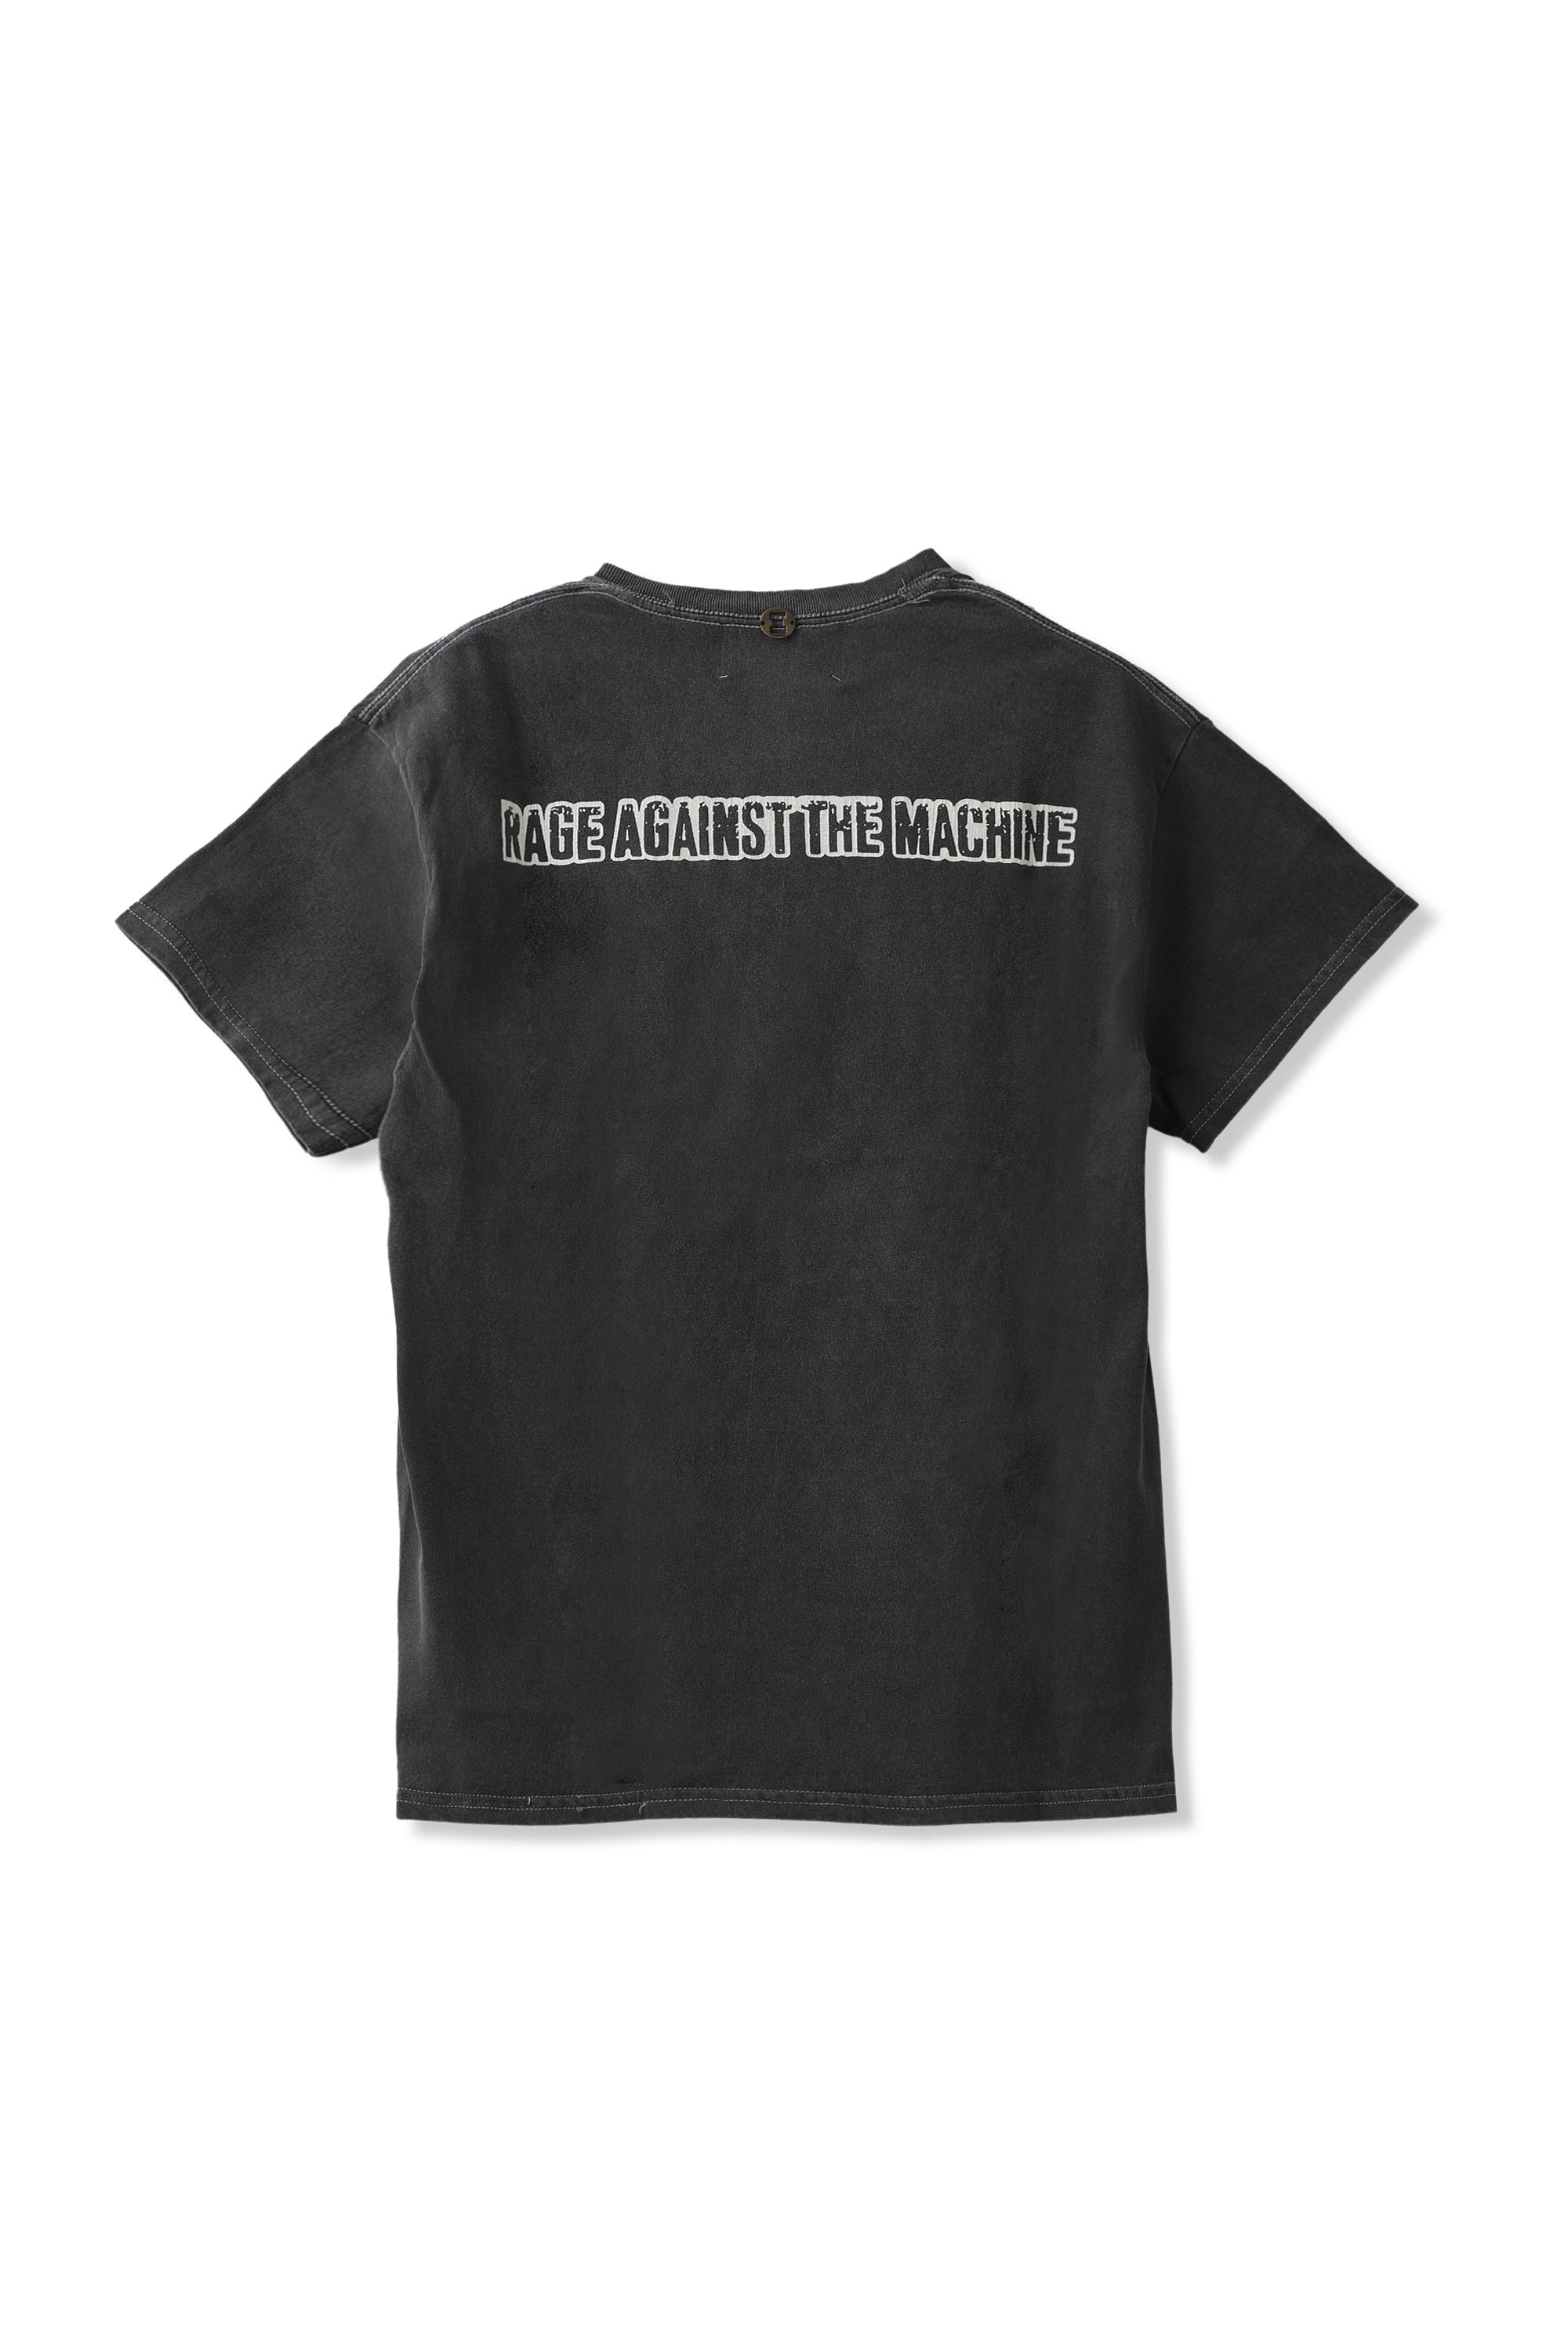 × RAGE AGAINST THE MACHINE FREE TO CHOOSE TEE